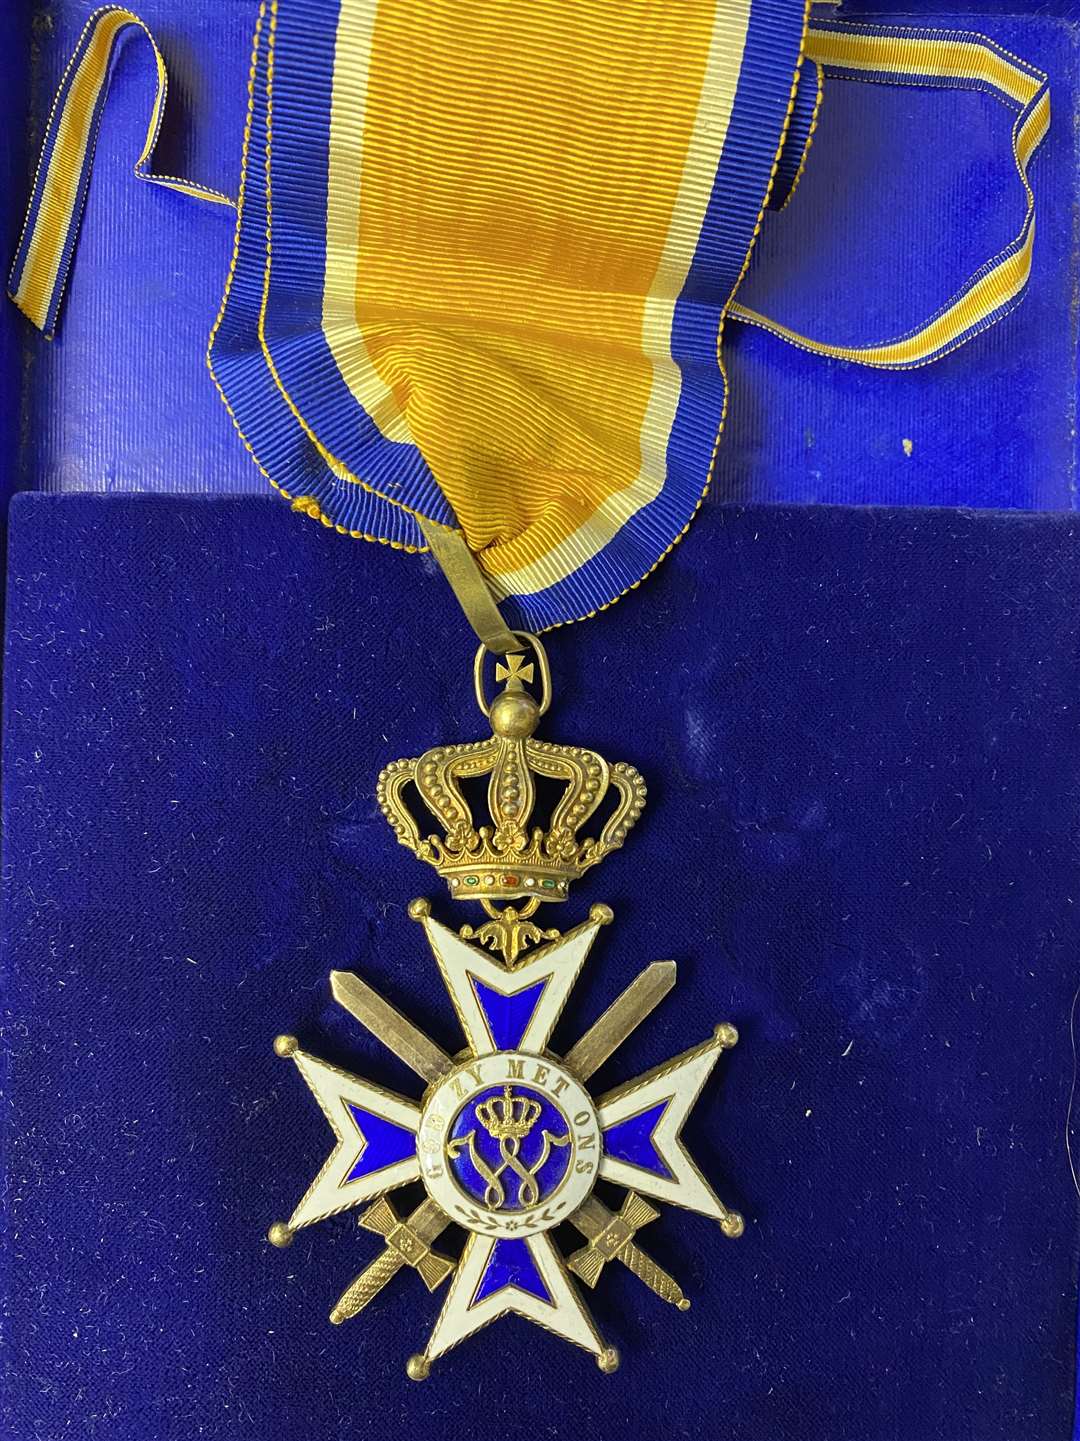 One of the medals of Col Walter Hugh Crichton